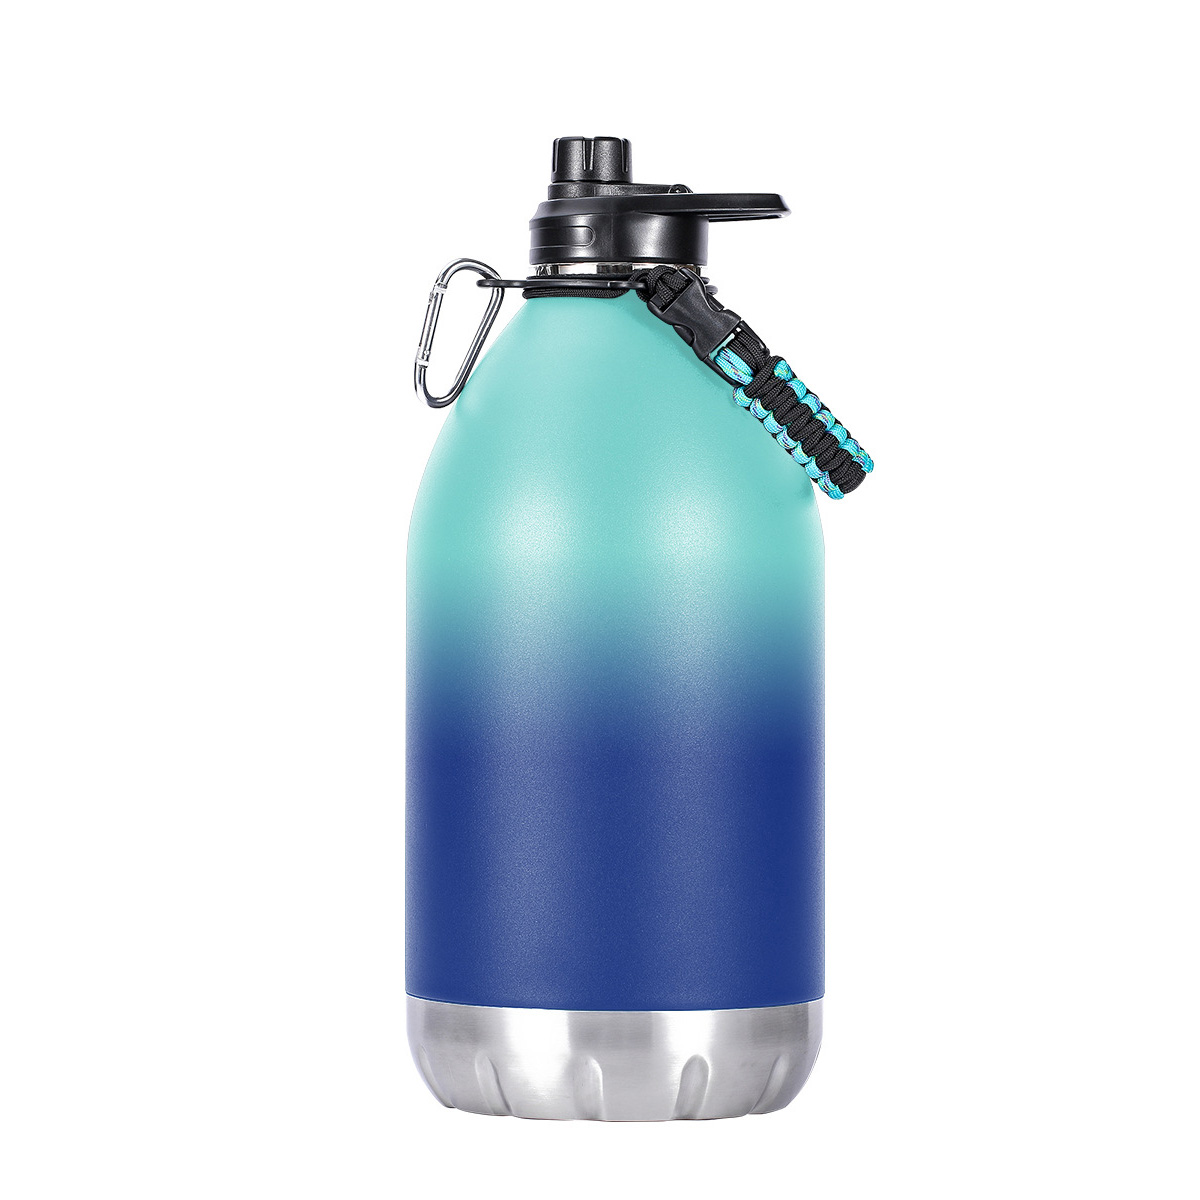 https://www.waterbottle.tech/wp-content/uploads/2021/11/large-capacity-water-bottle-1-gallon-3.8-liter-stainless-steel-insulated-growler-flask-s1112800-3.jpg